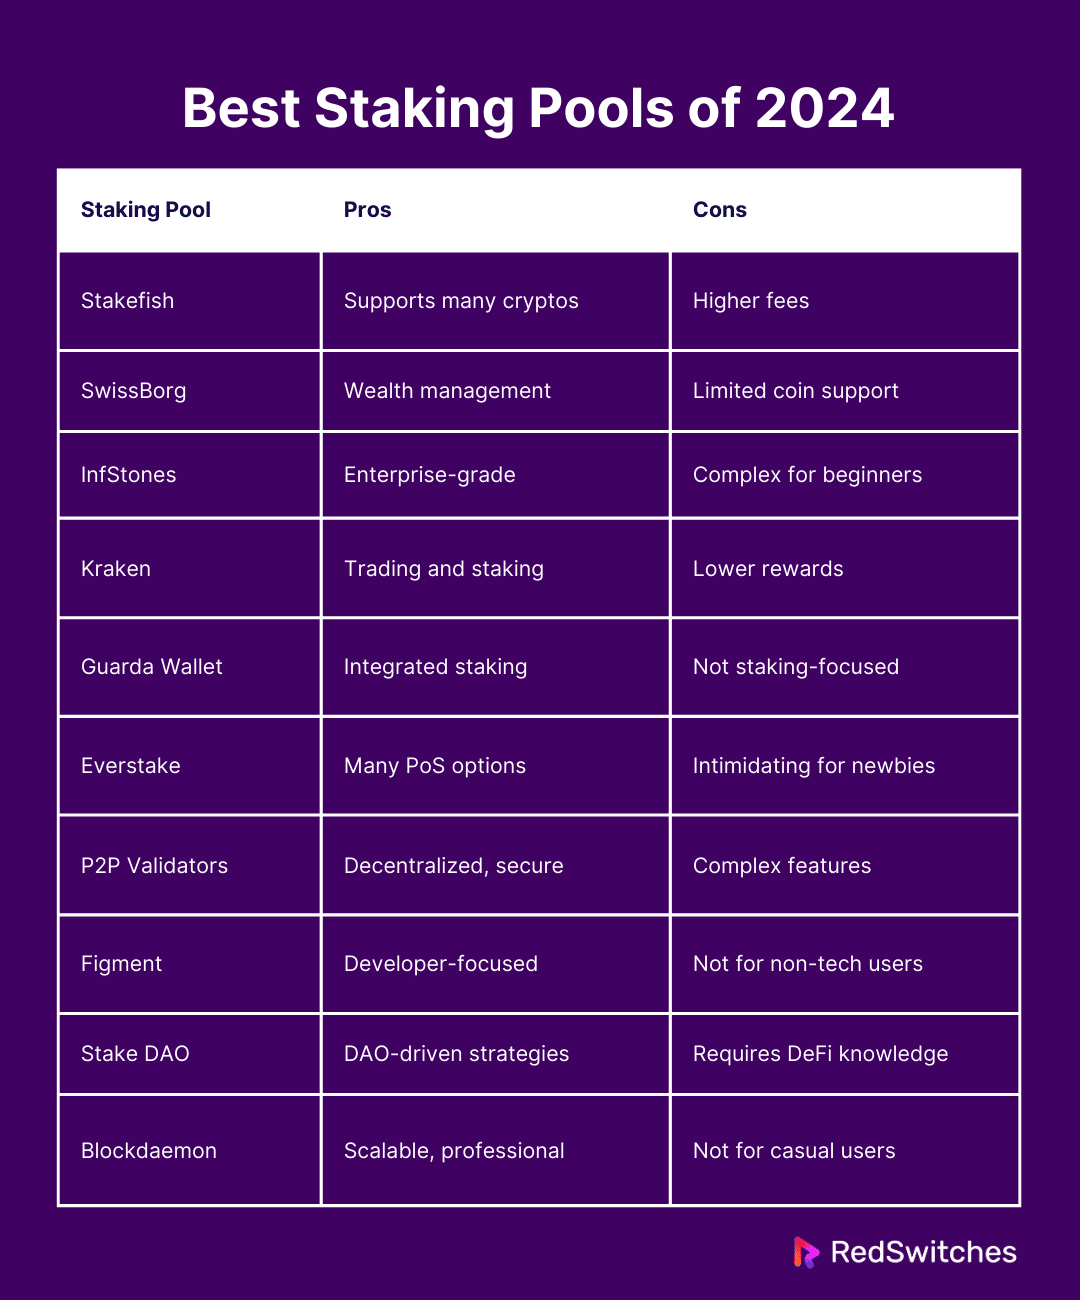 Best Staking Pools of 2024